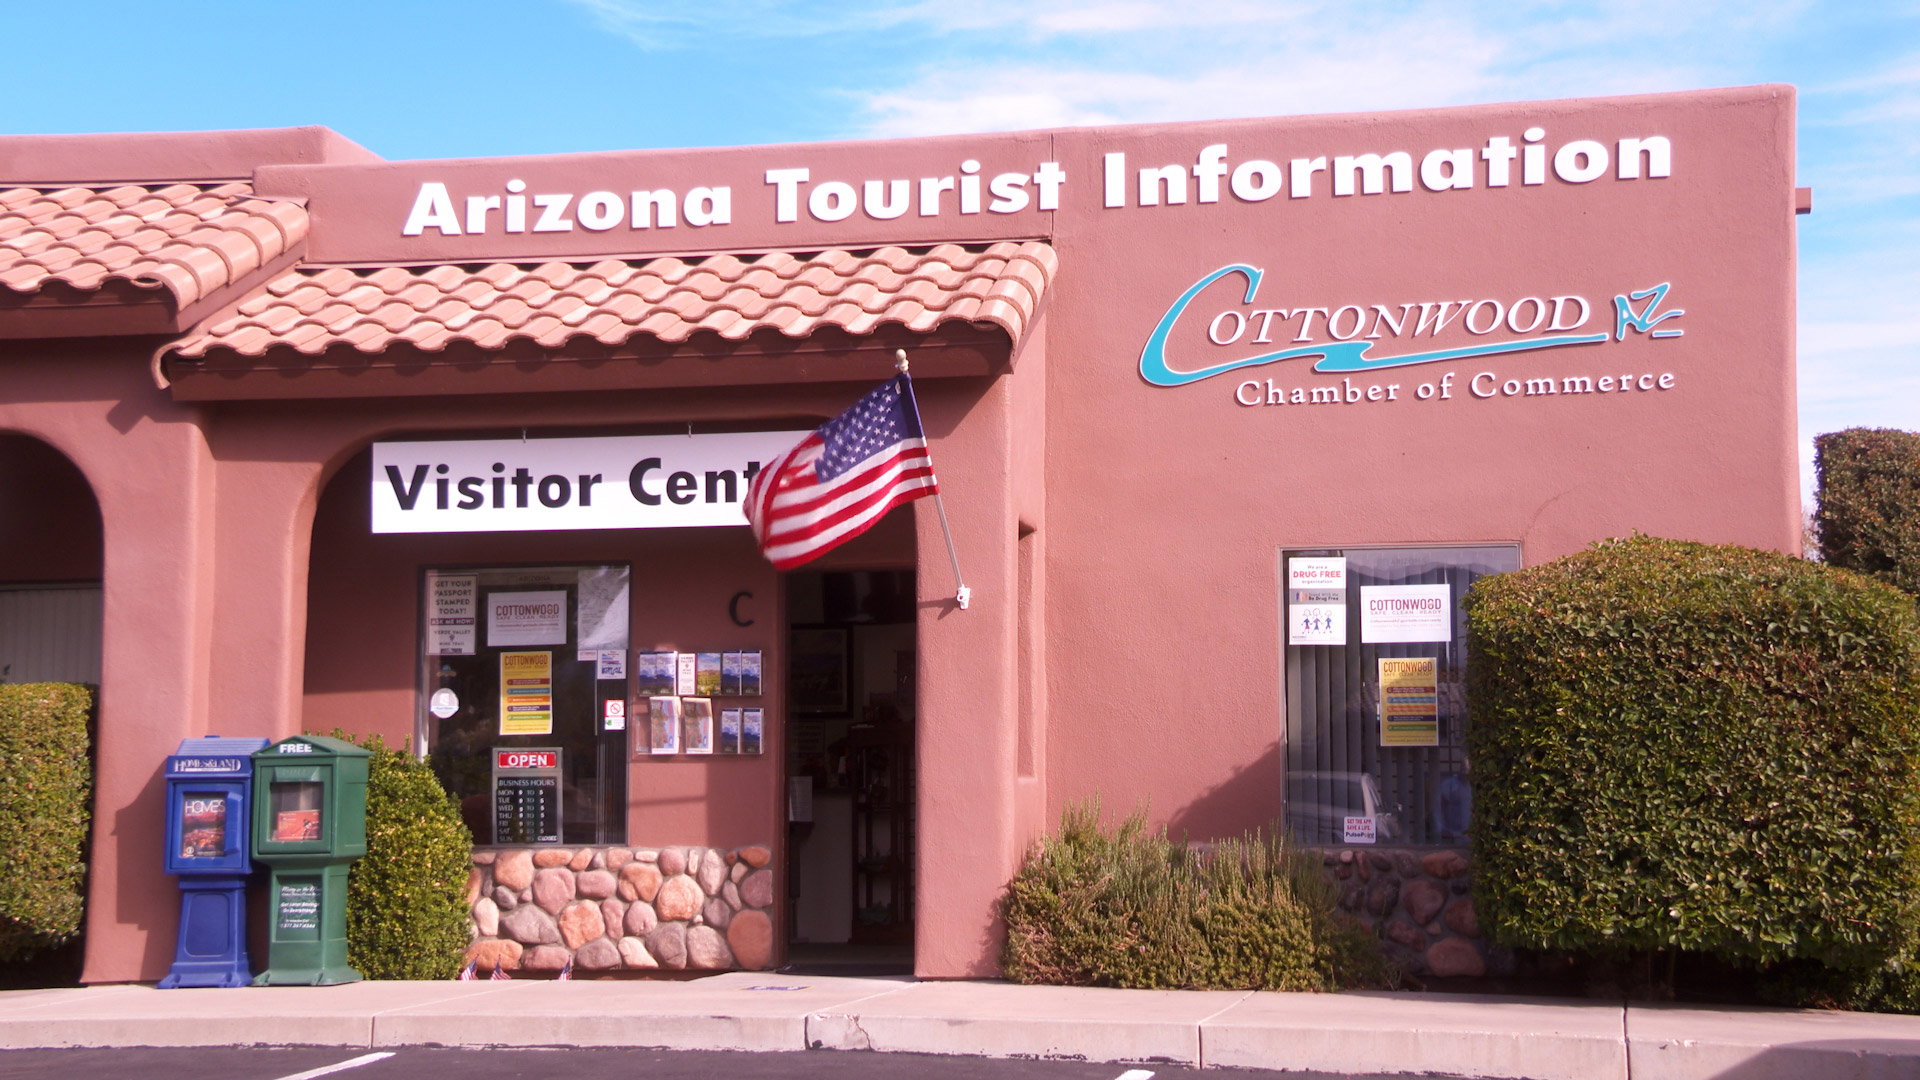 Cottonwood Chamber of Commerce Visitor Center entrance